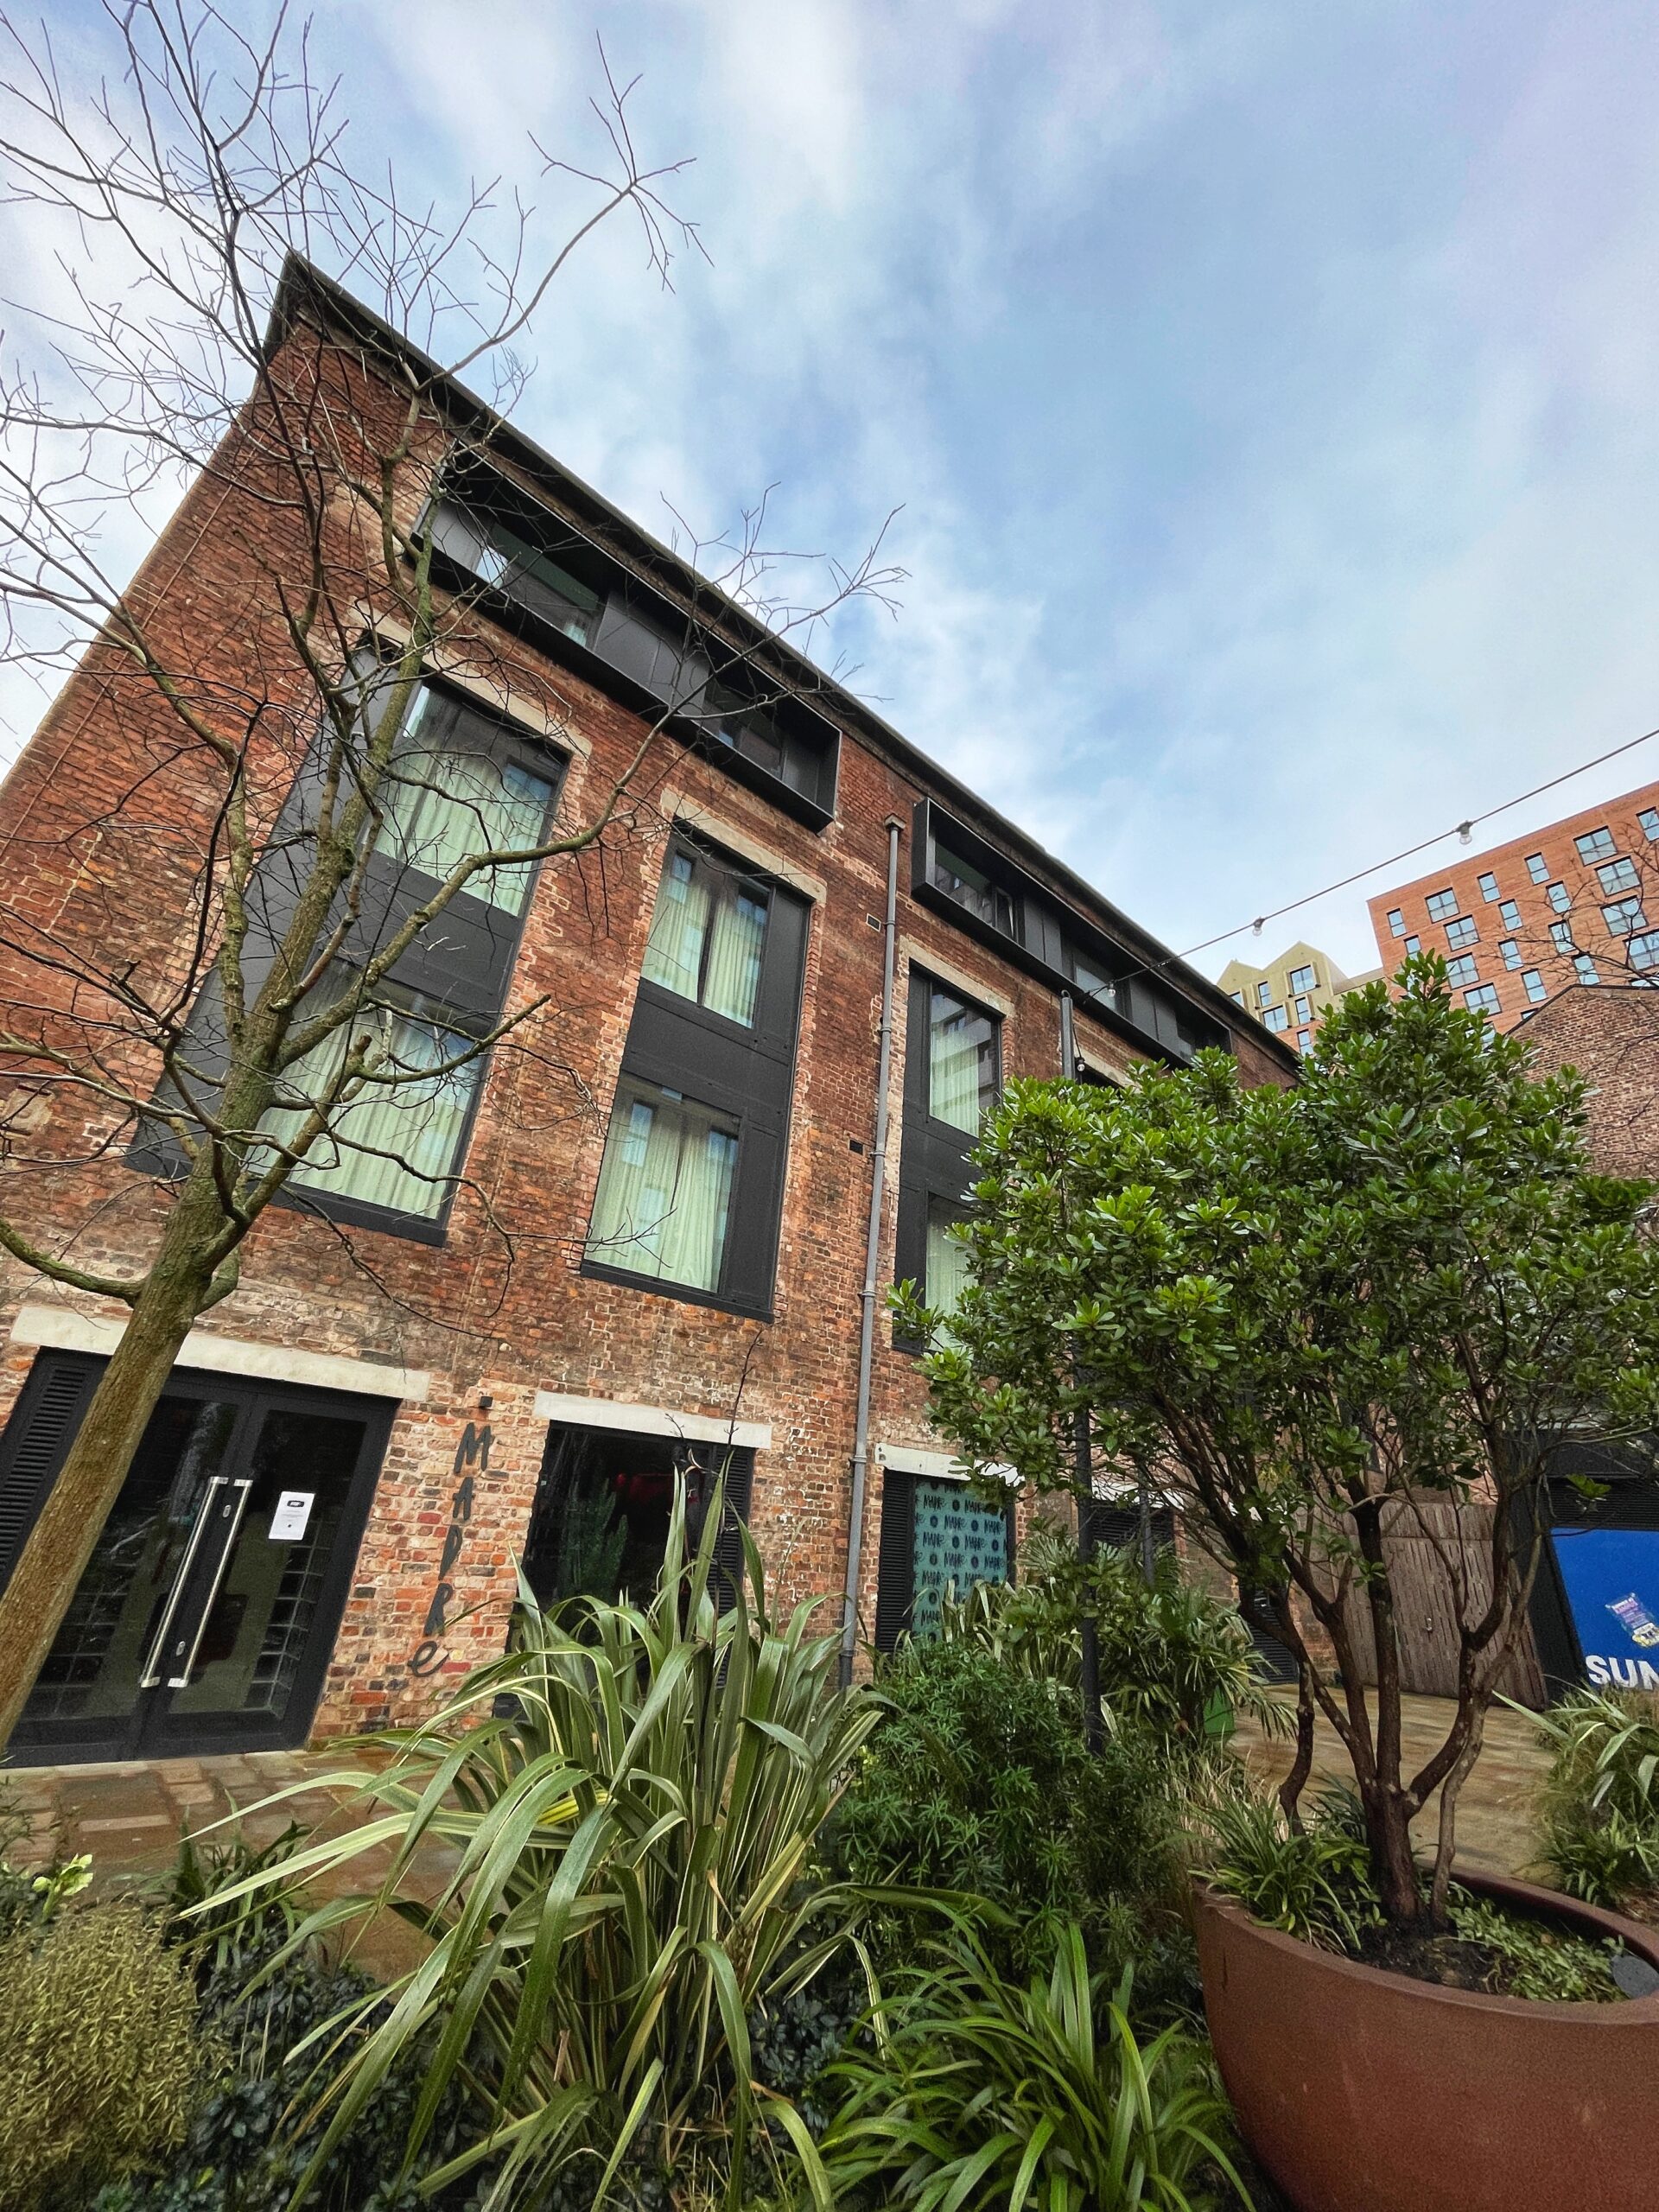 Minshull Warehouse at Kampus is home to some of Manchester's coolest apartments. Credit: The Manc Group